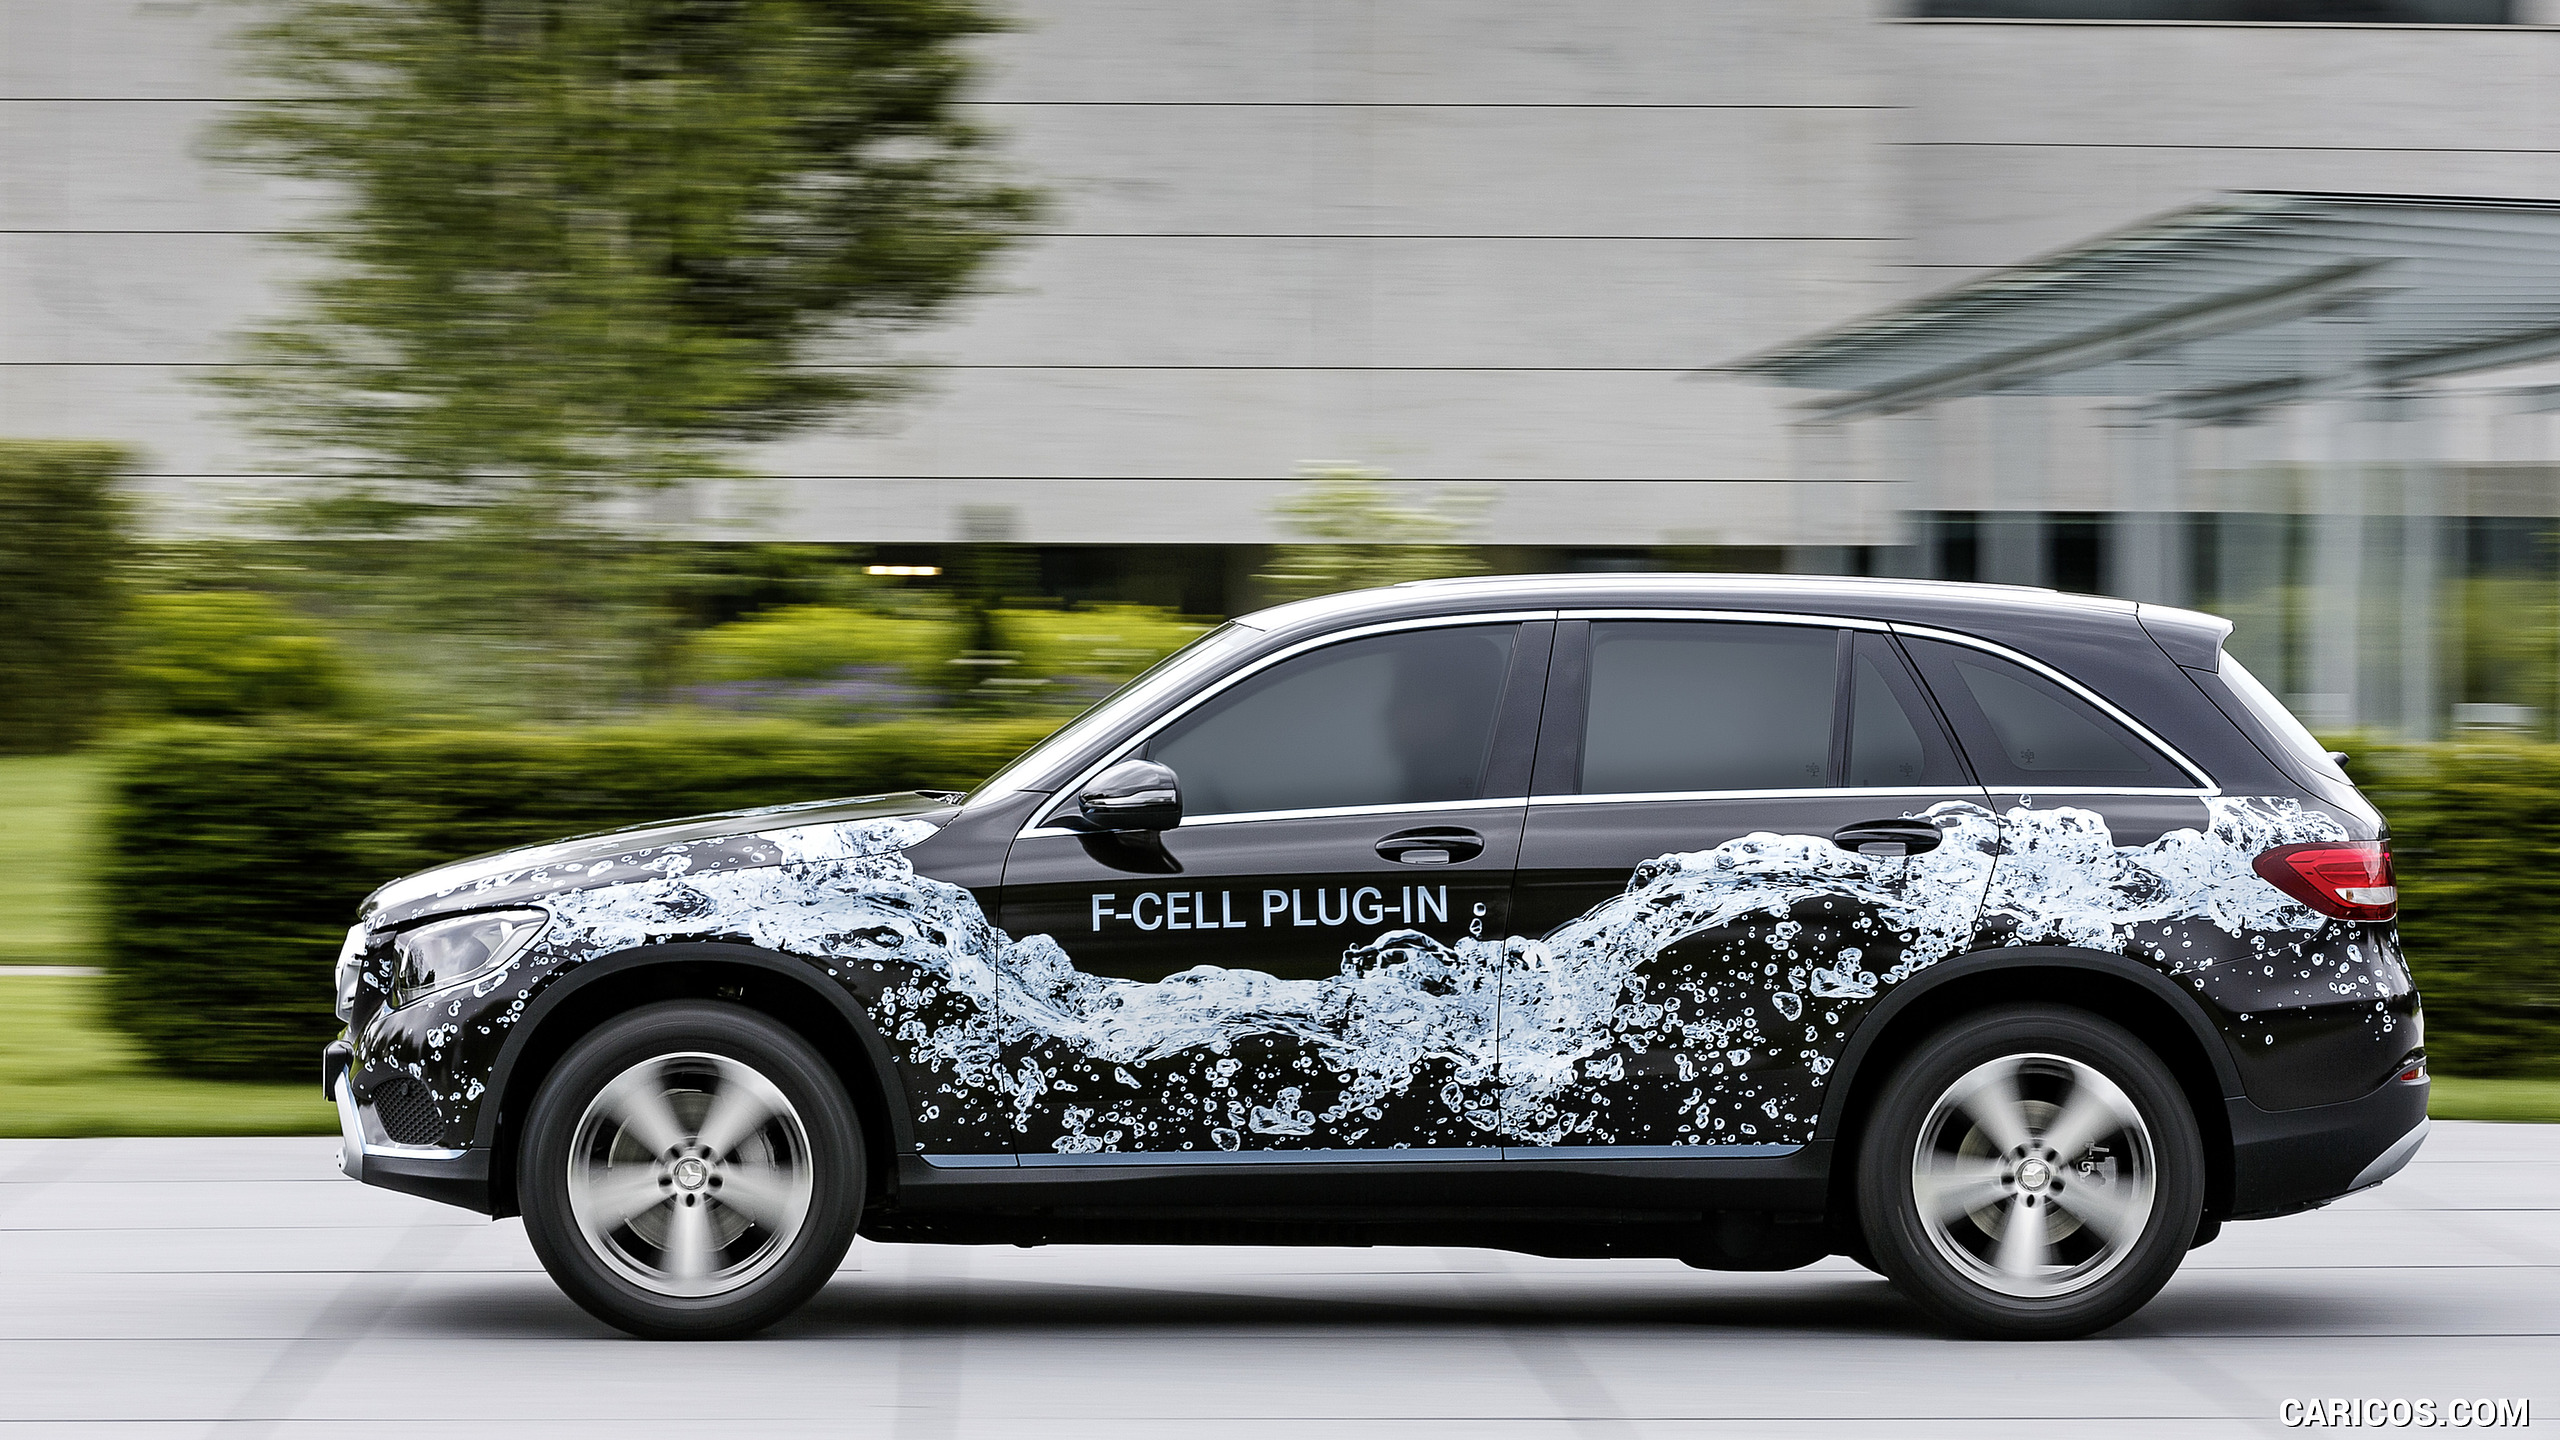 2016 Mercedes-Benz GLC F-Cell Plug-In Concept - Side, #5 of 20